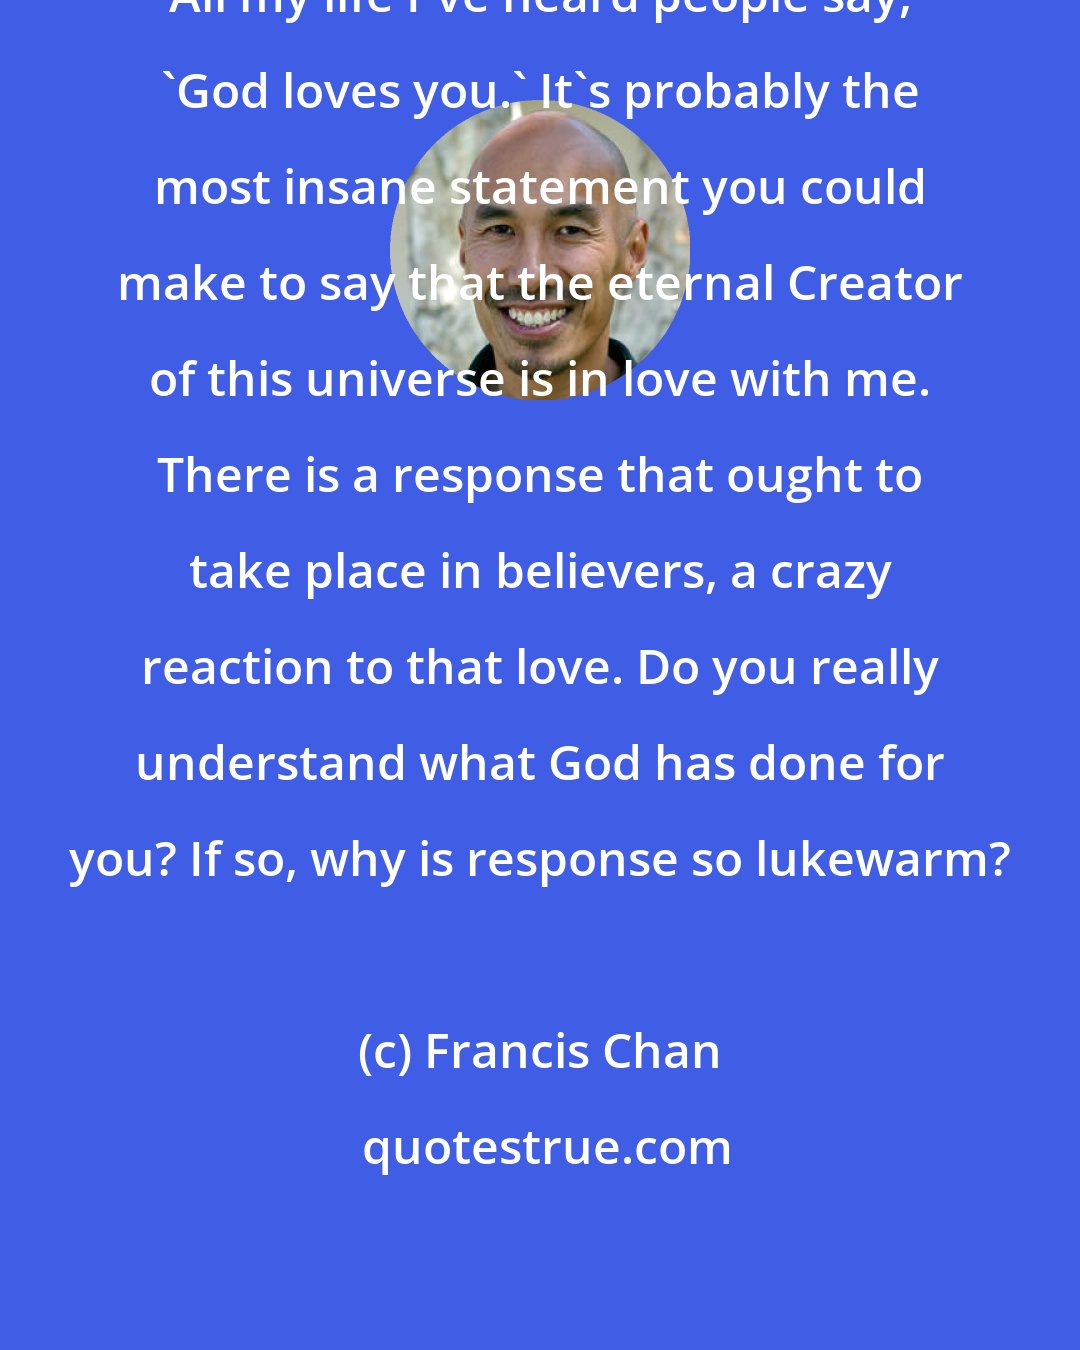 Francis Chan: All my life I've heard people say, 'God loves you.' It's probably the most insane statement you could make to say that the eternal Creator of this universe is in love with me. There is a response that ought to take place in believers, a crazy reaction to that love. Do you really understand what God has done for you? If so, why is response so lukewarm?